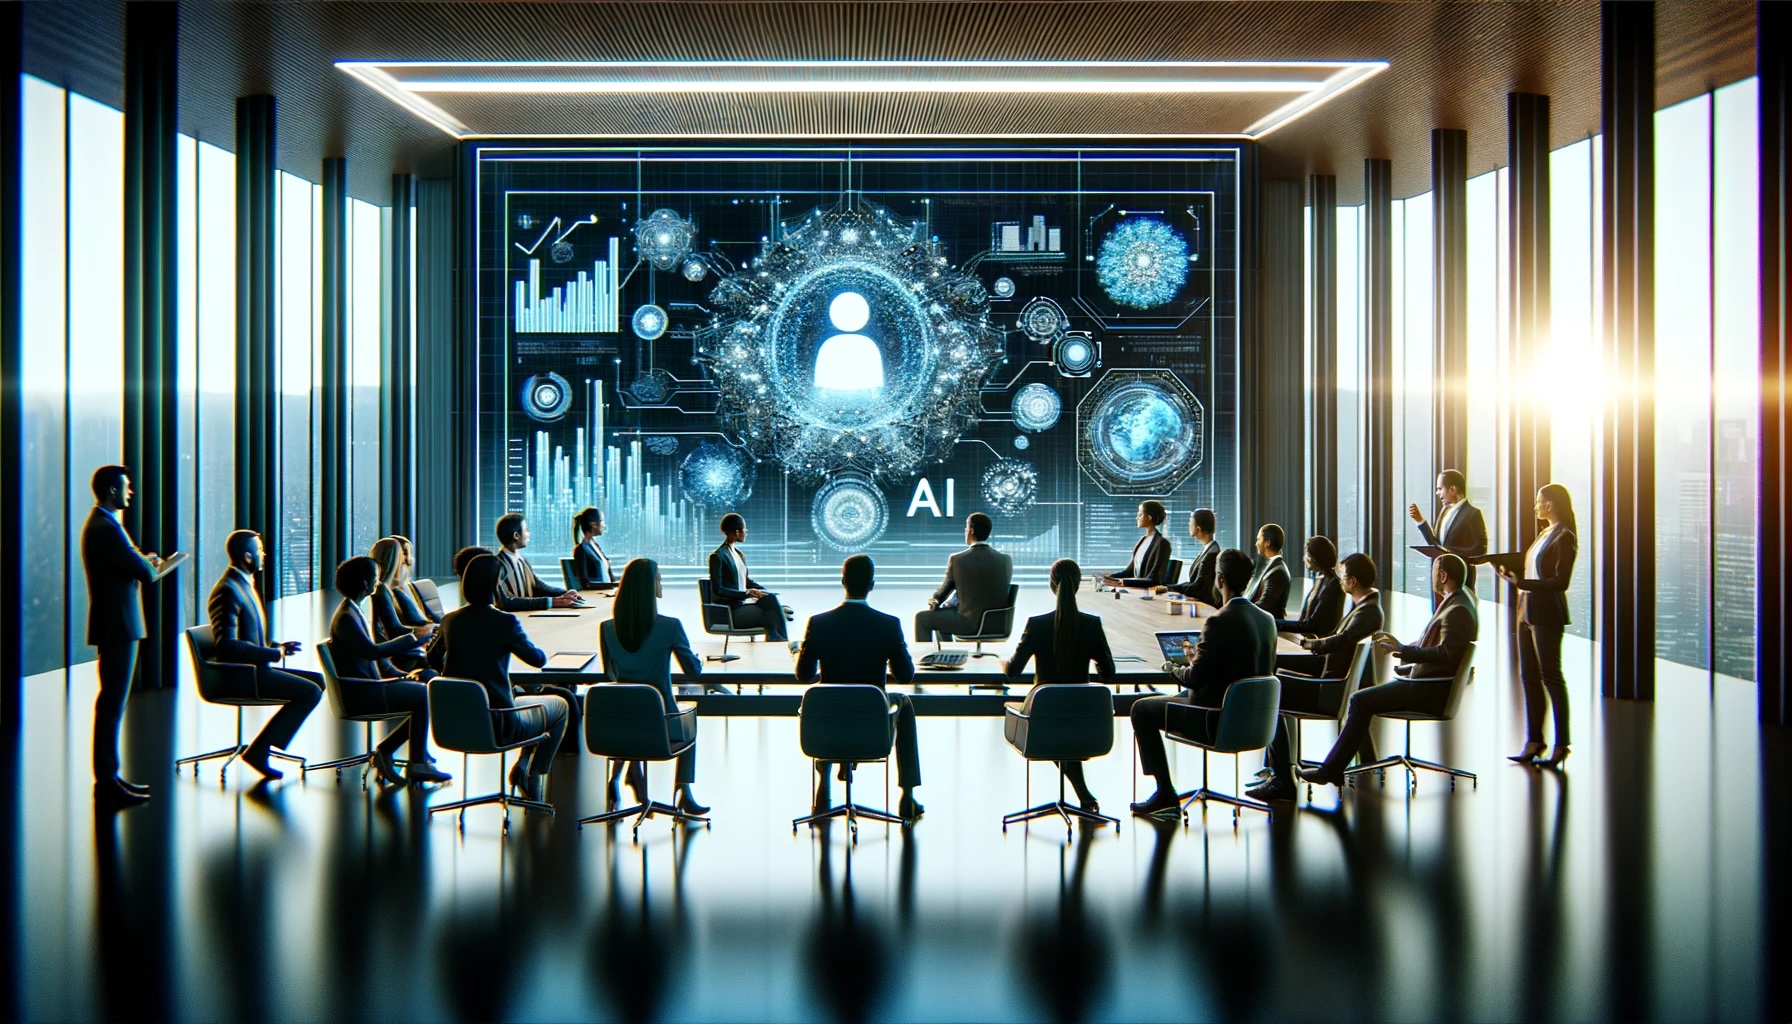 Graphic image of a board meeting with a mixture of business suit wearing people in a large, high tech, glass lined room